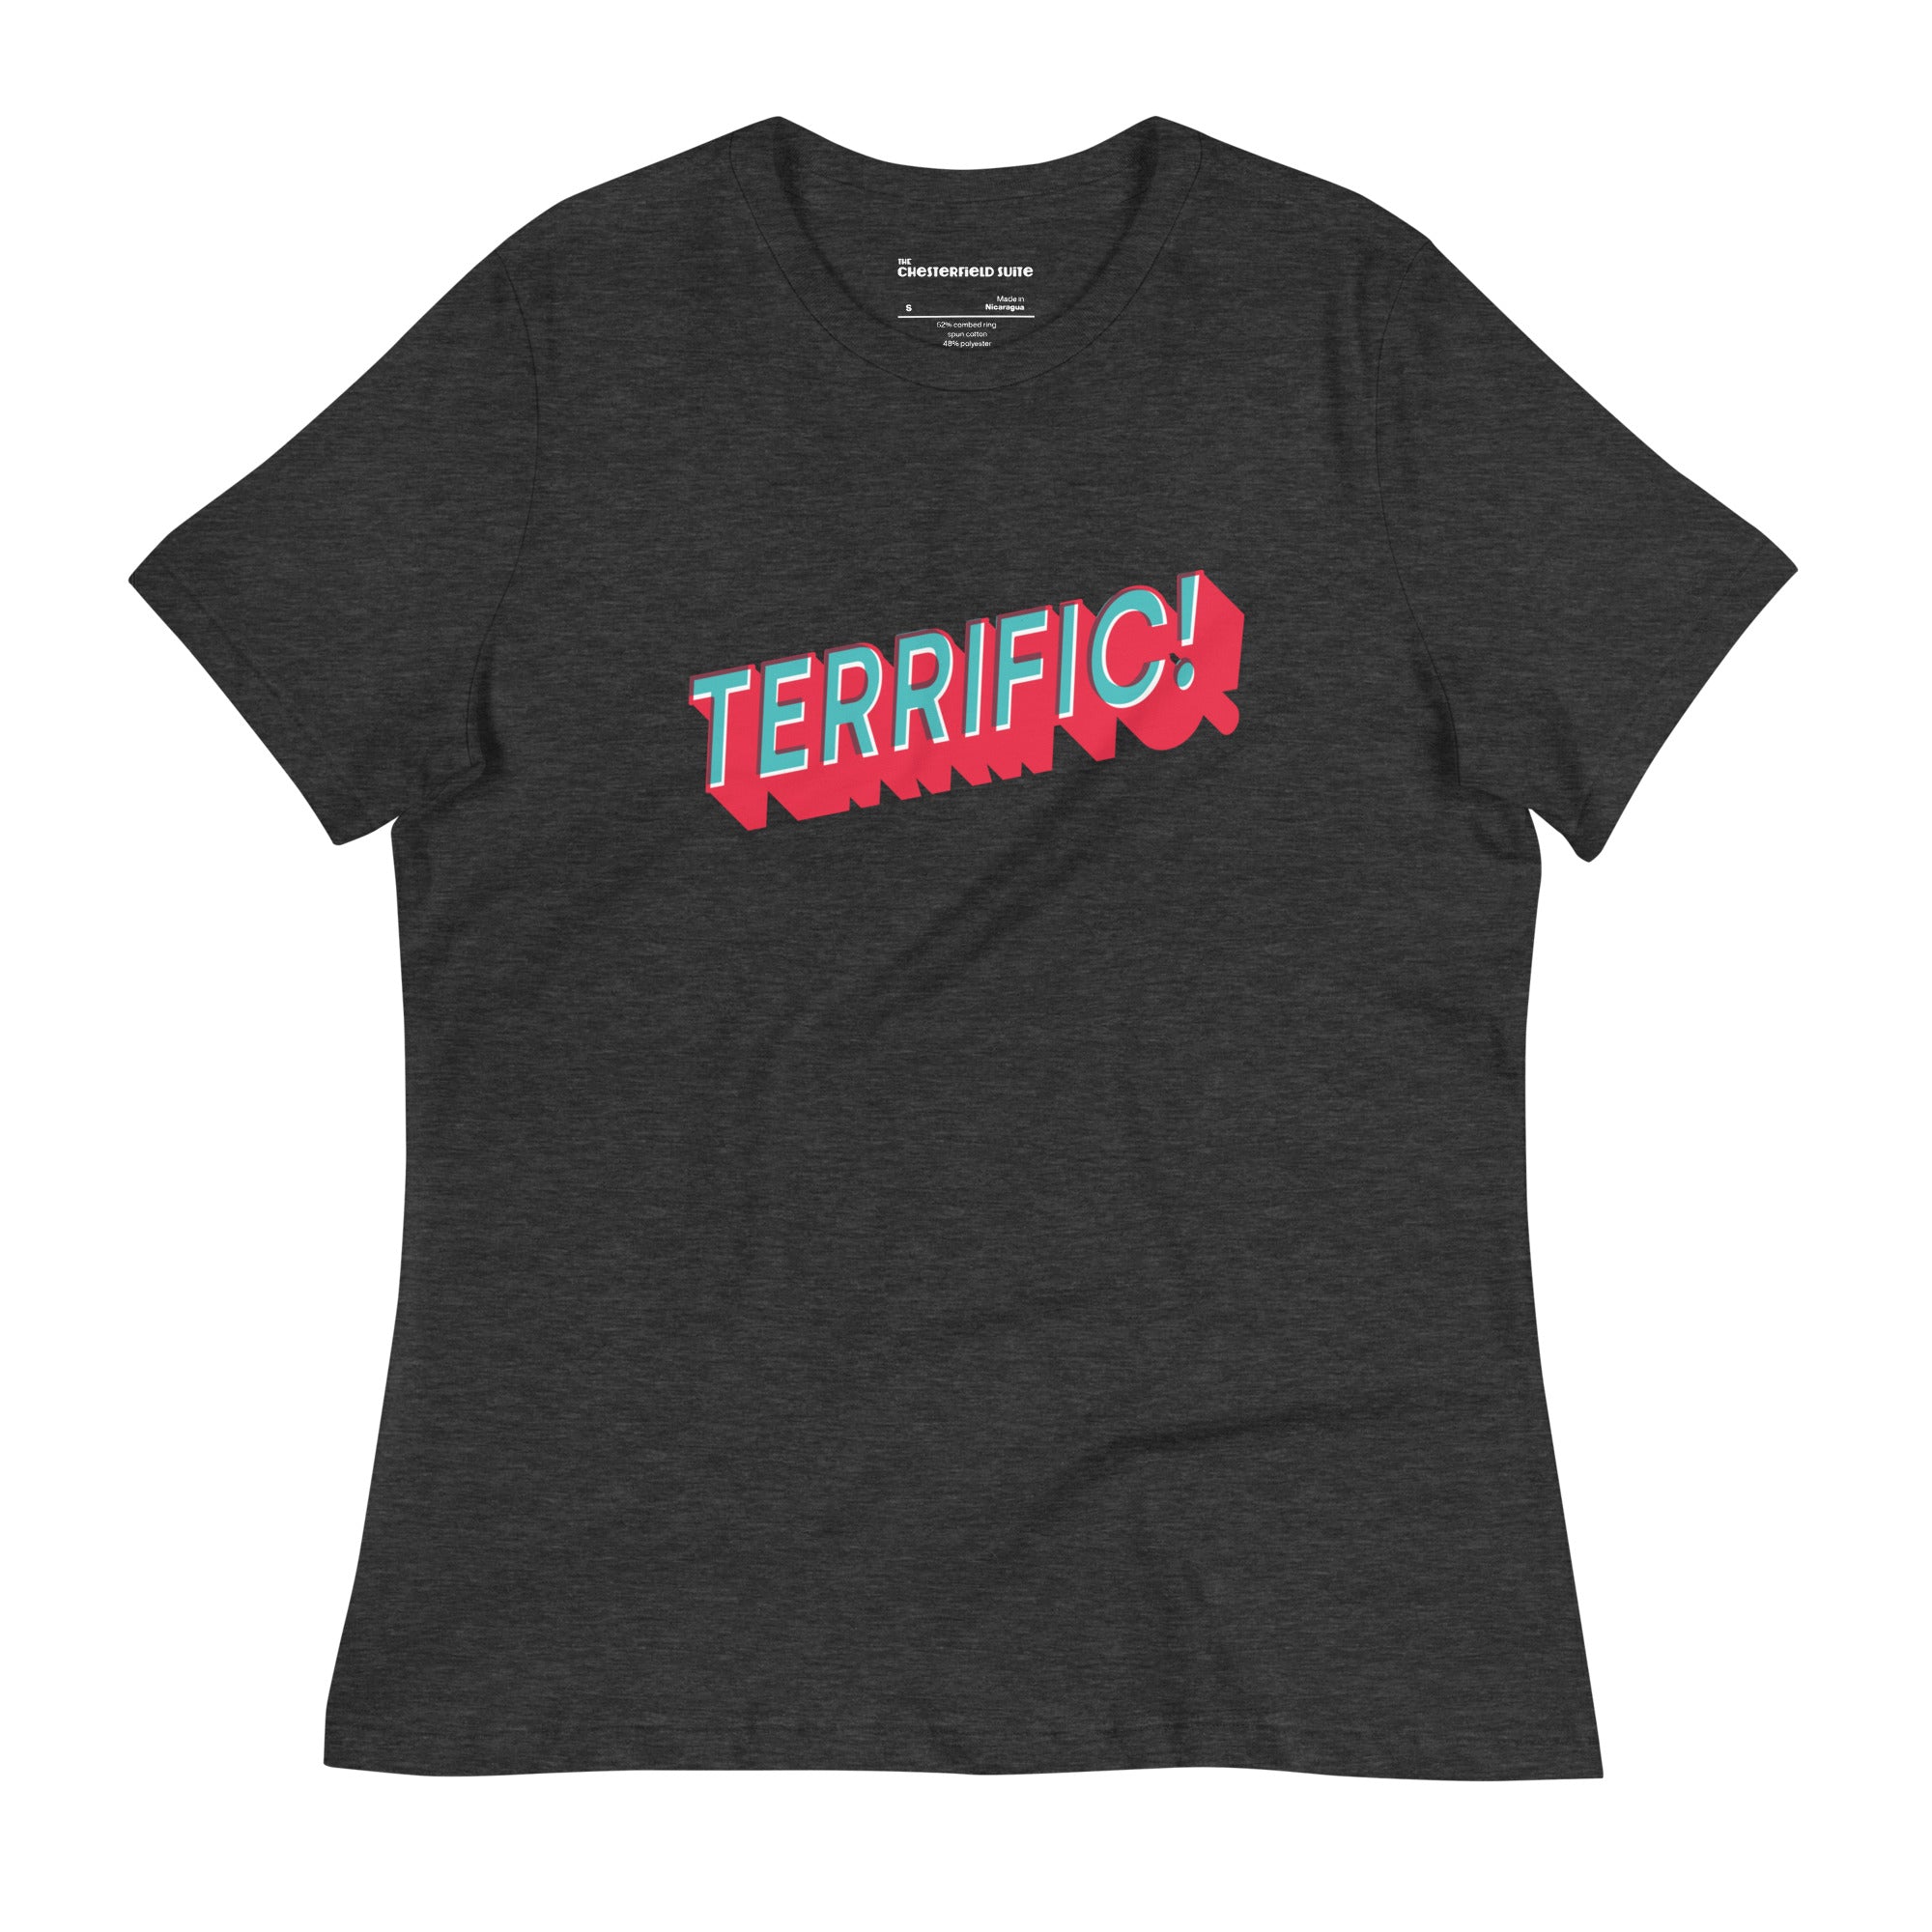 the word terrific in turquoise and red on a black women's t-shirt